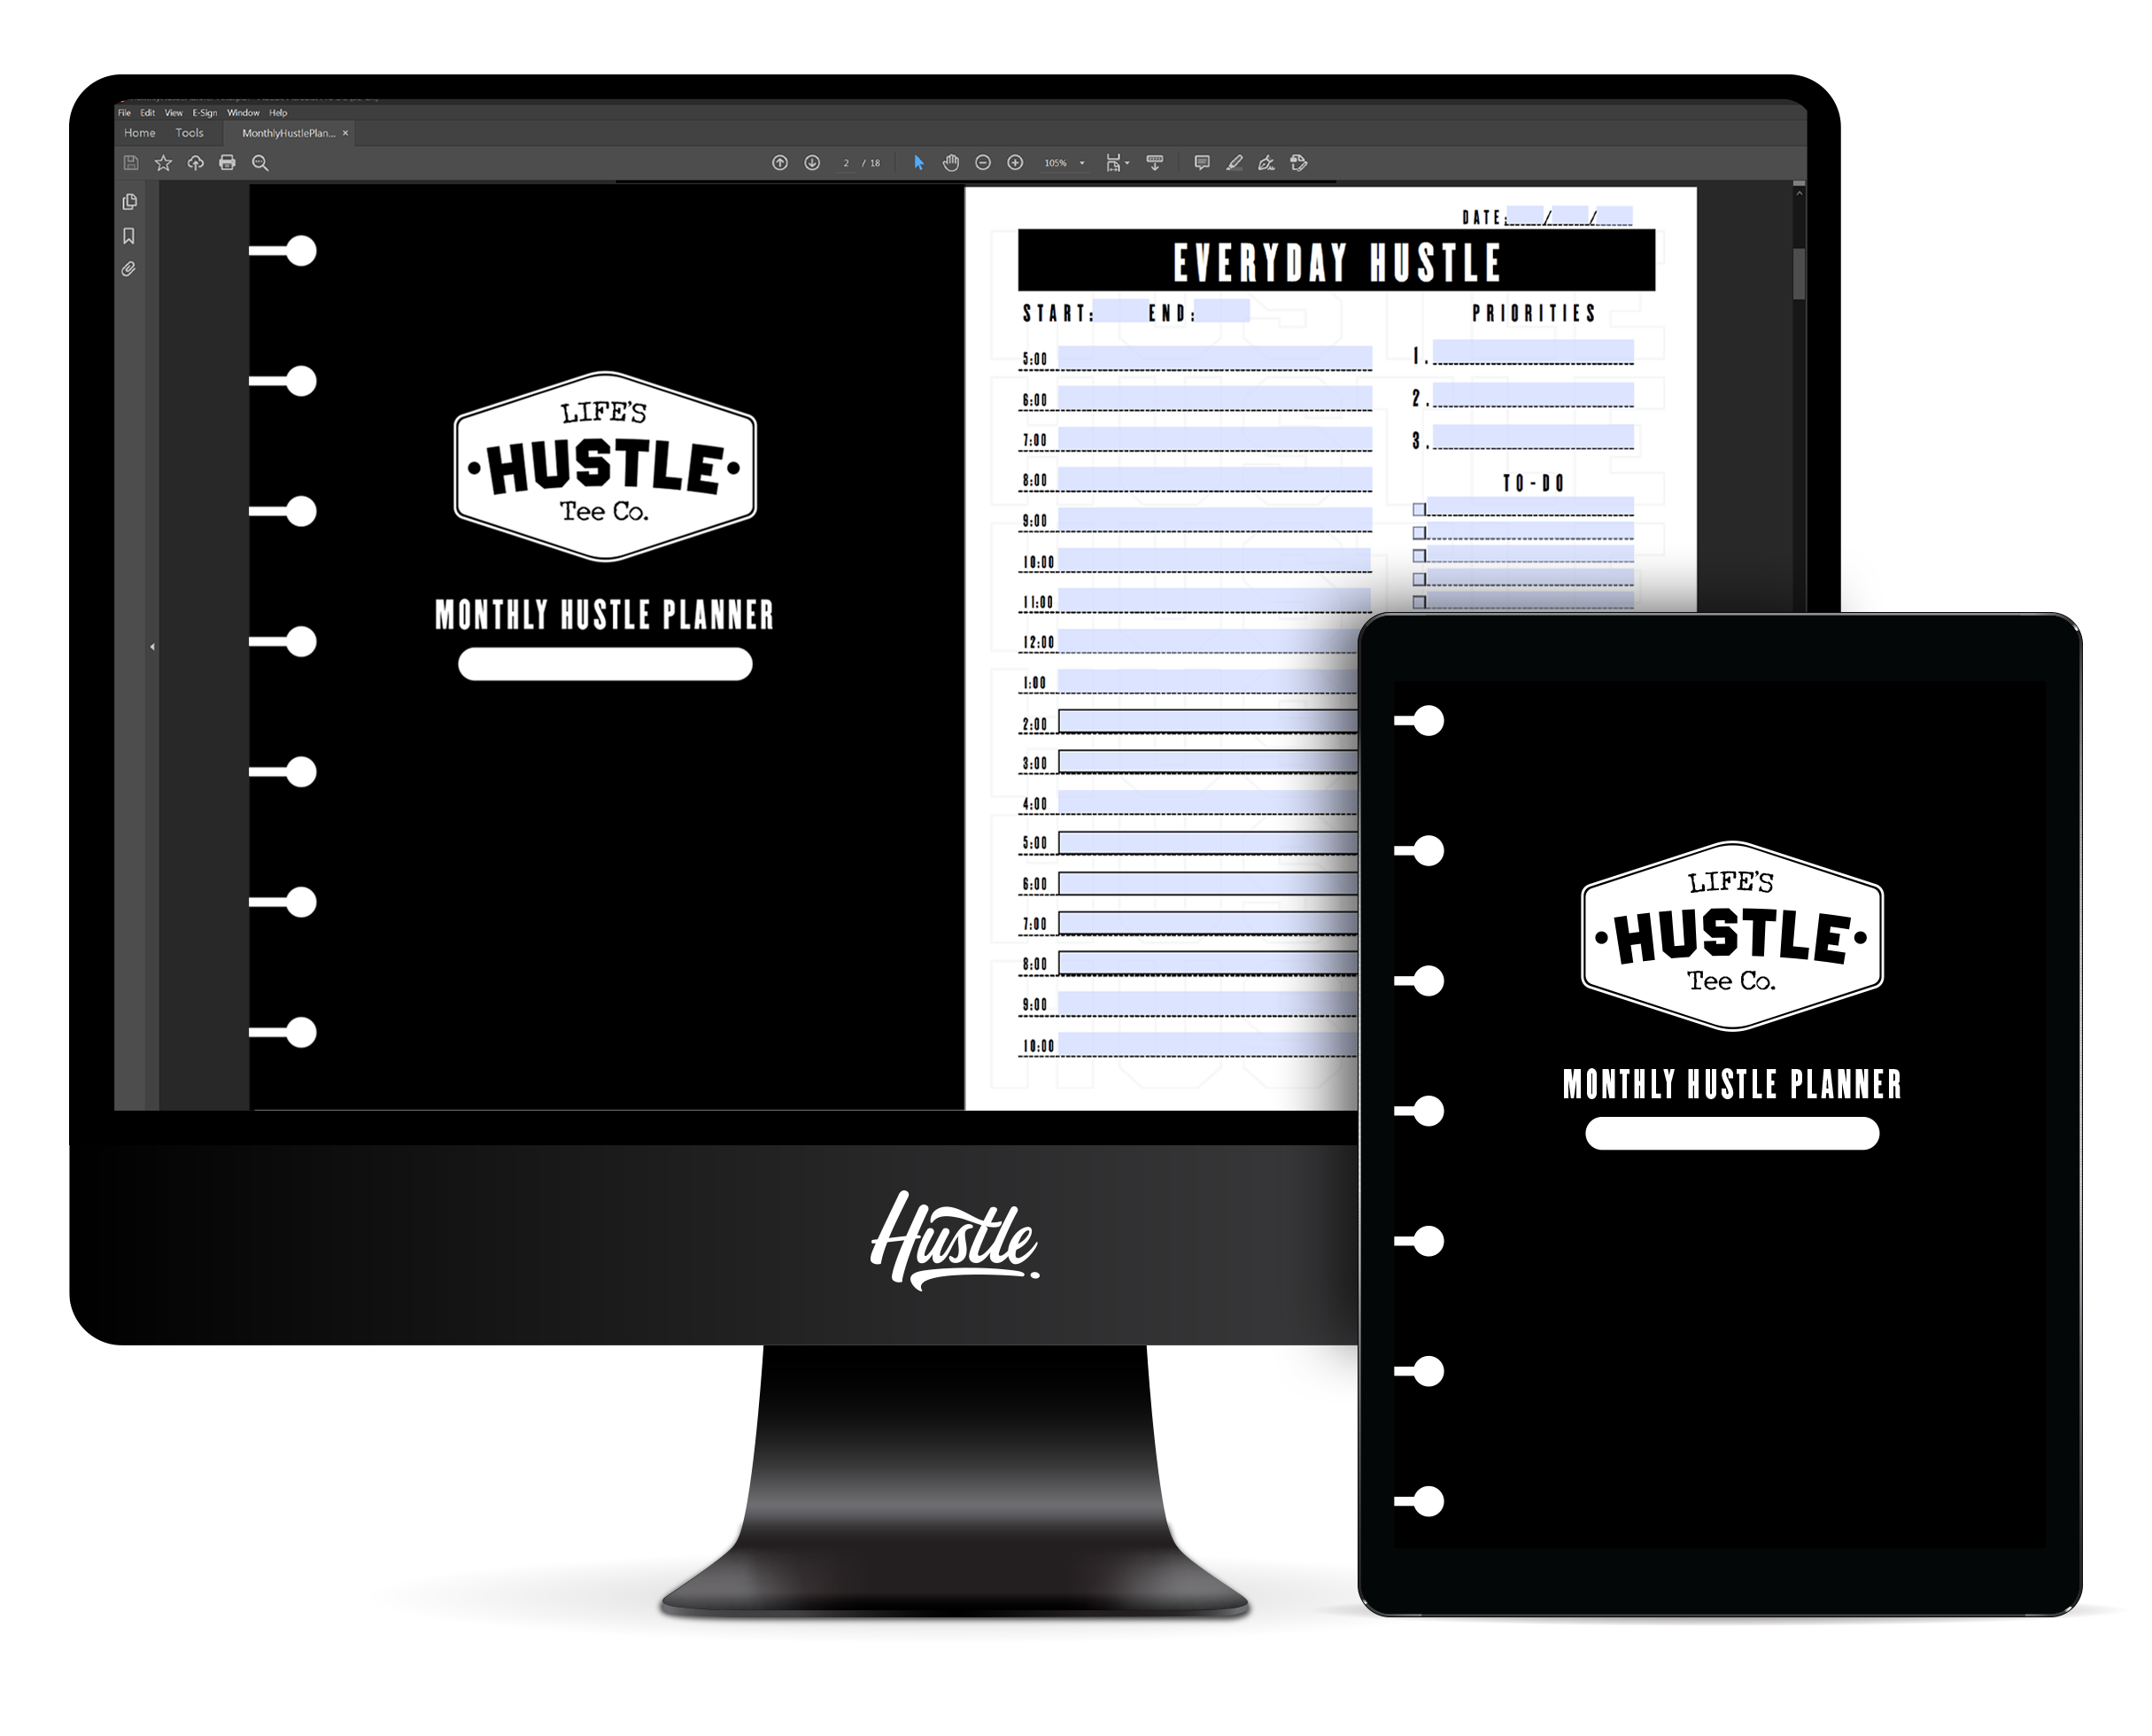 free-monthly-planner-life-s-hustle-tee-co